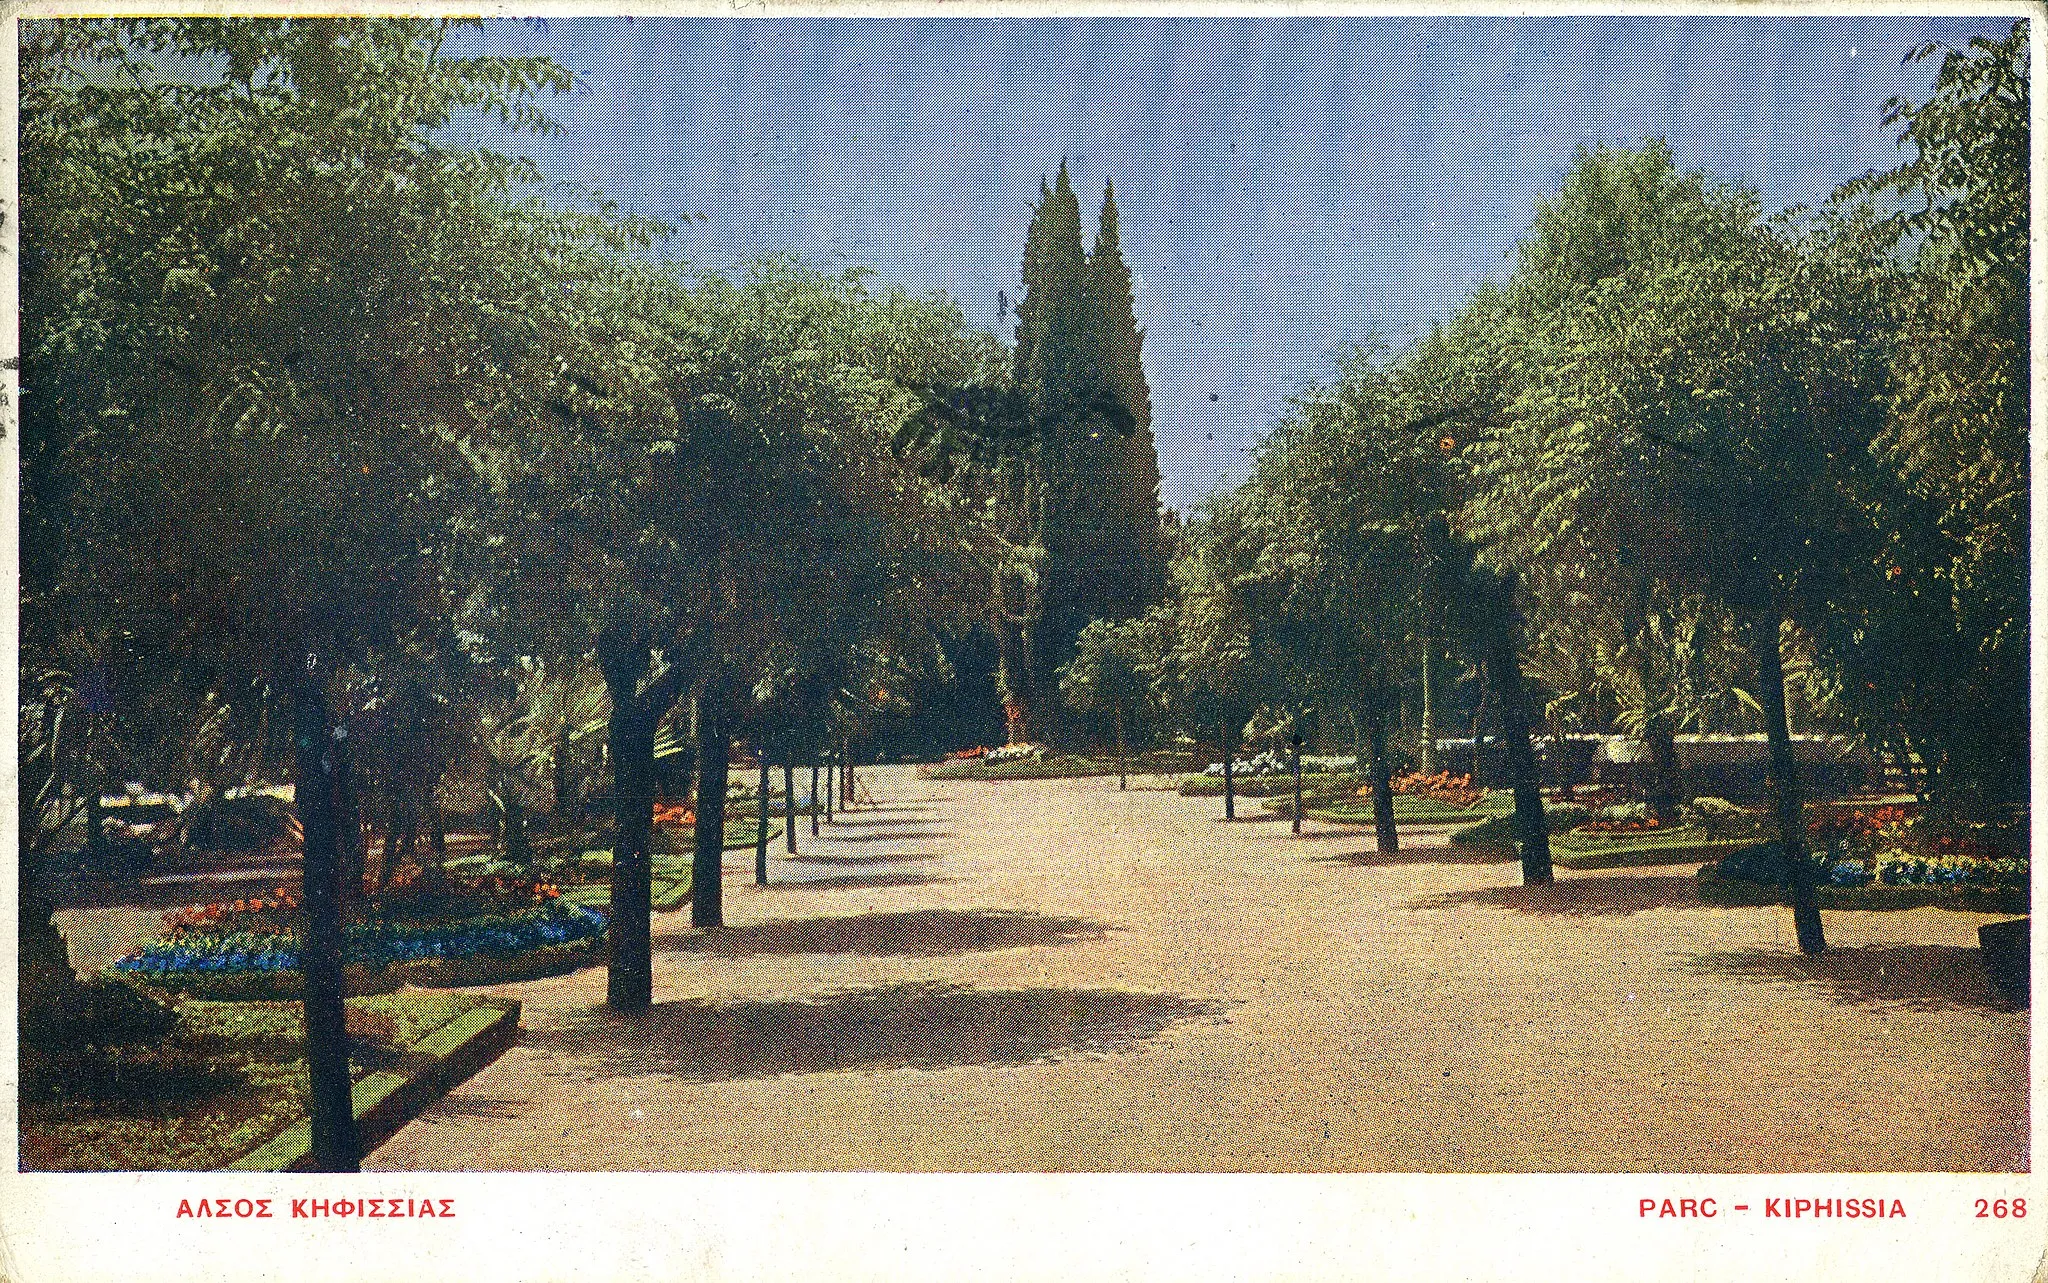 Photo showing: Kifissia Grove. Postcard published by Aspiotis, in c. 1915.